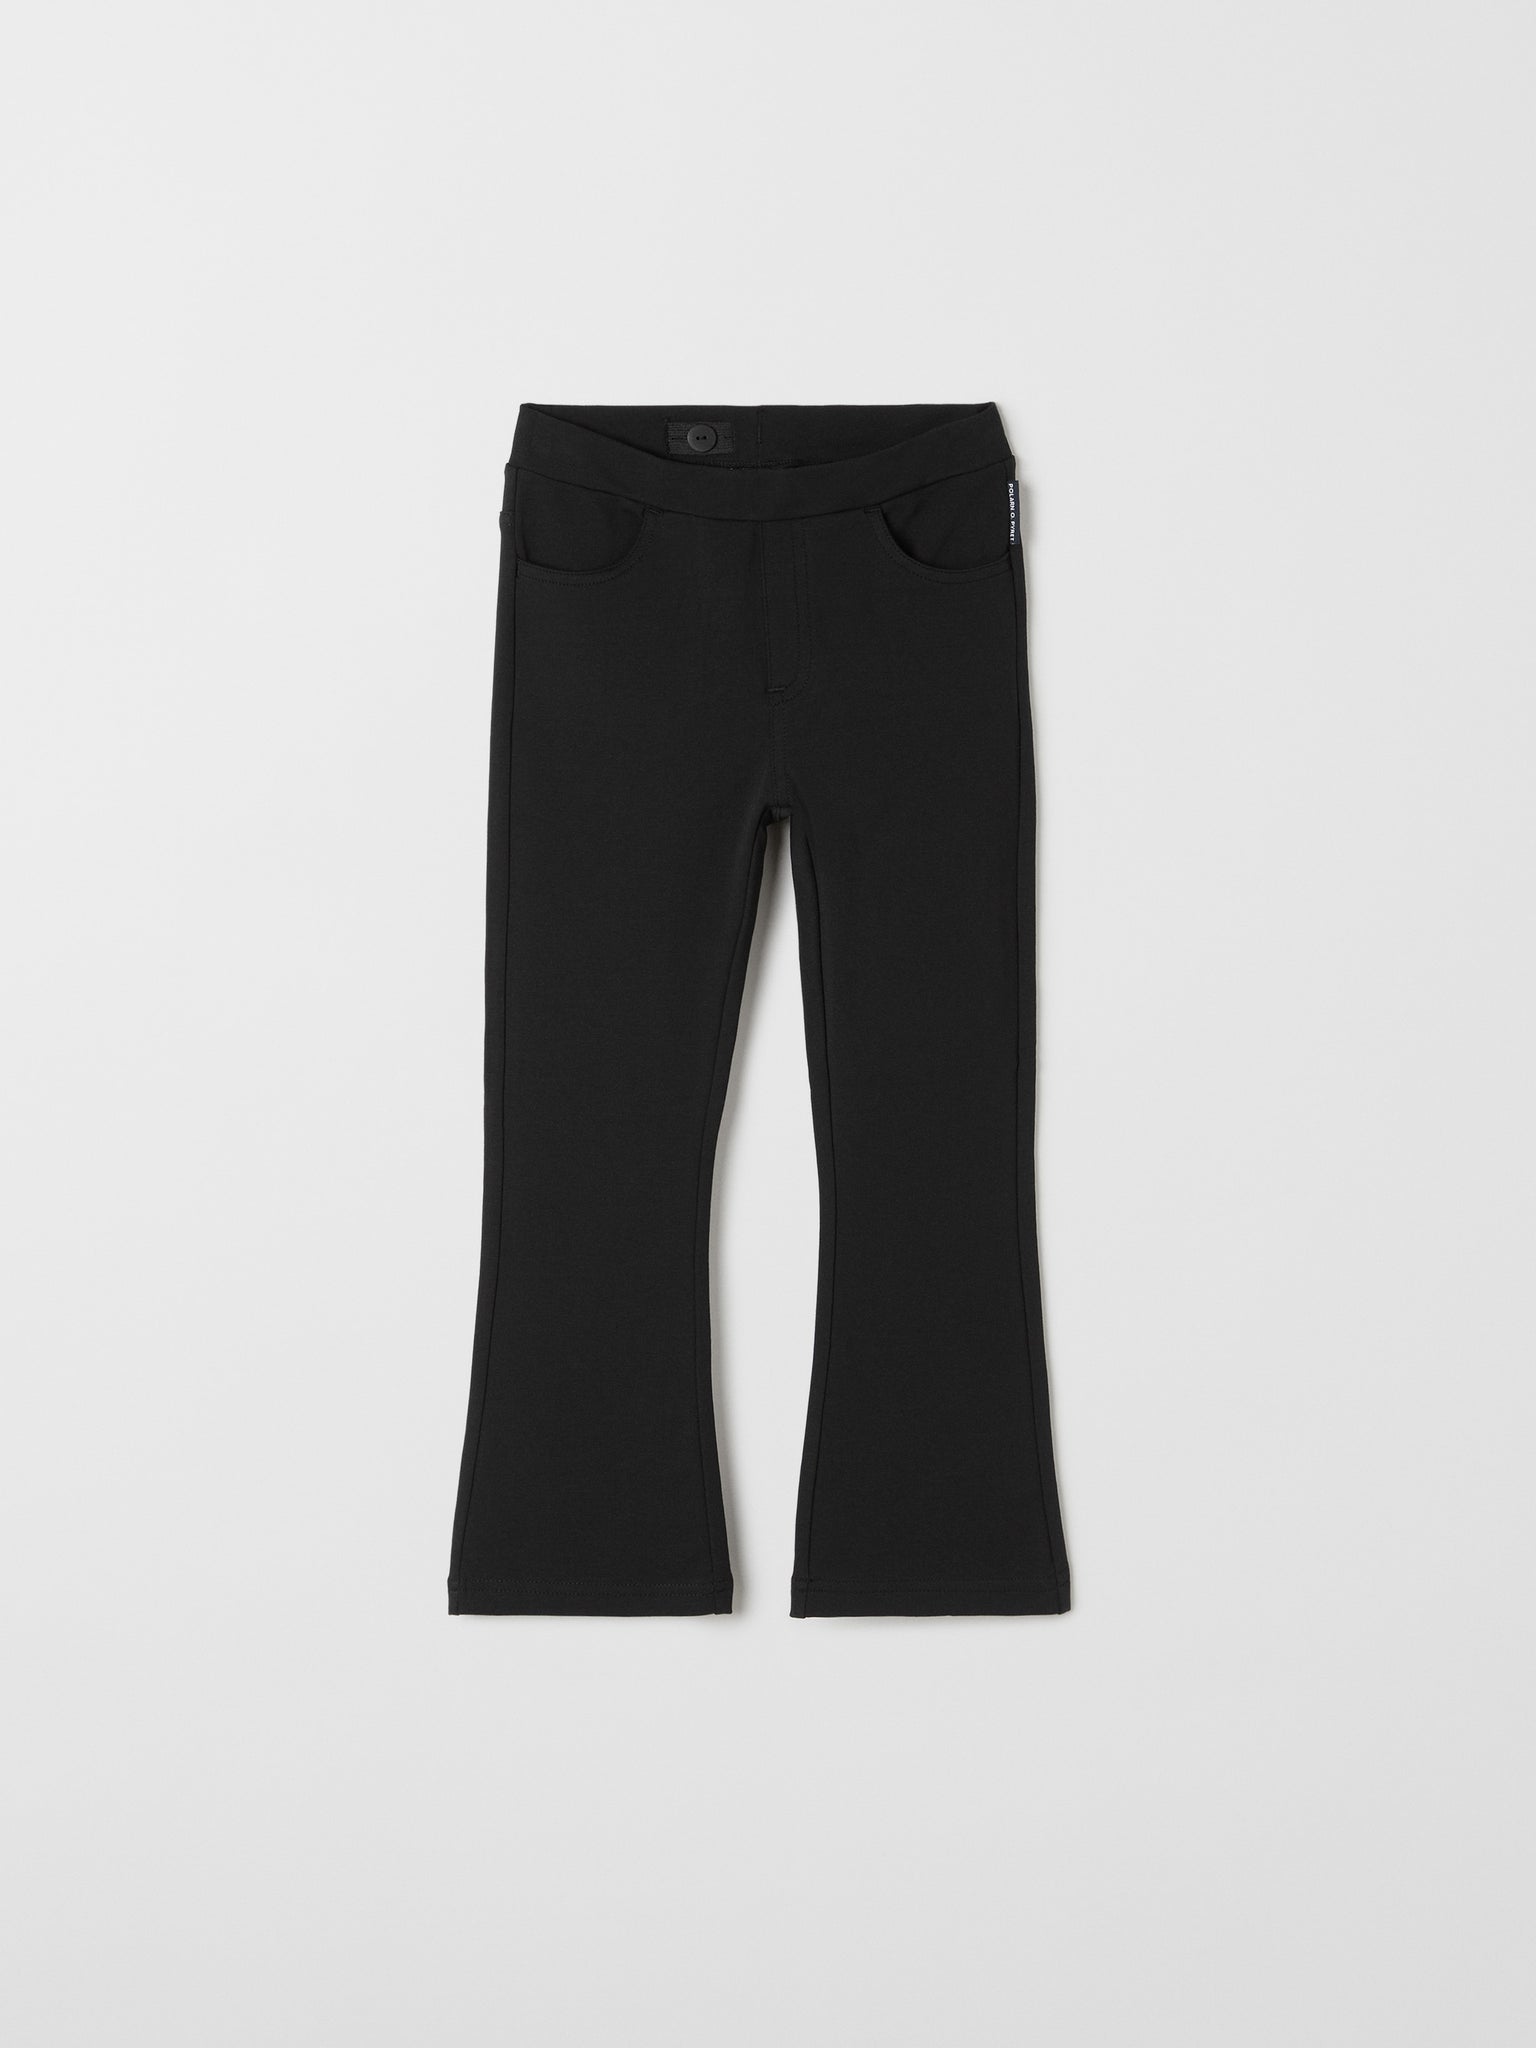 Kids Black Flared Cotton Joggers from the Polarn O. Pyret kids collection. The best ethical kids clothes